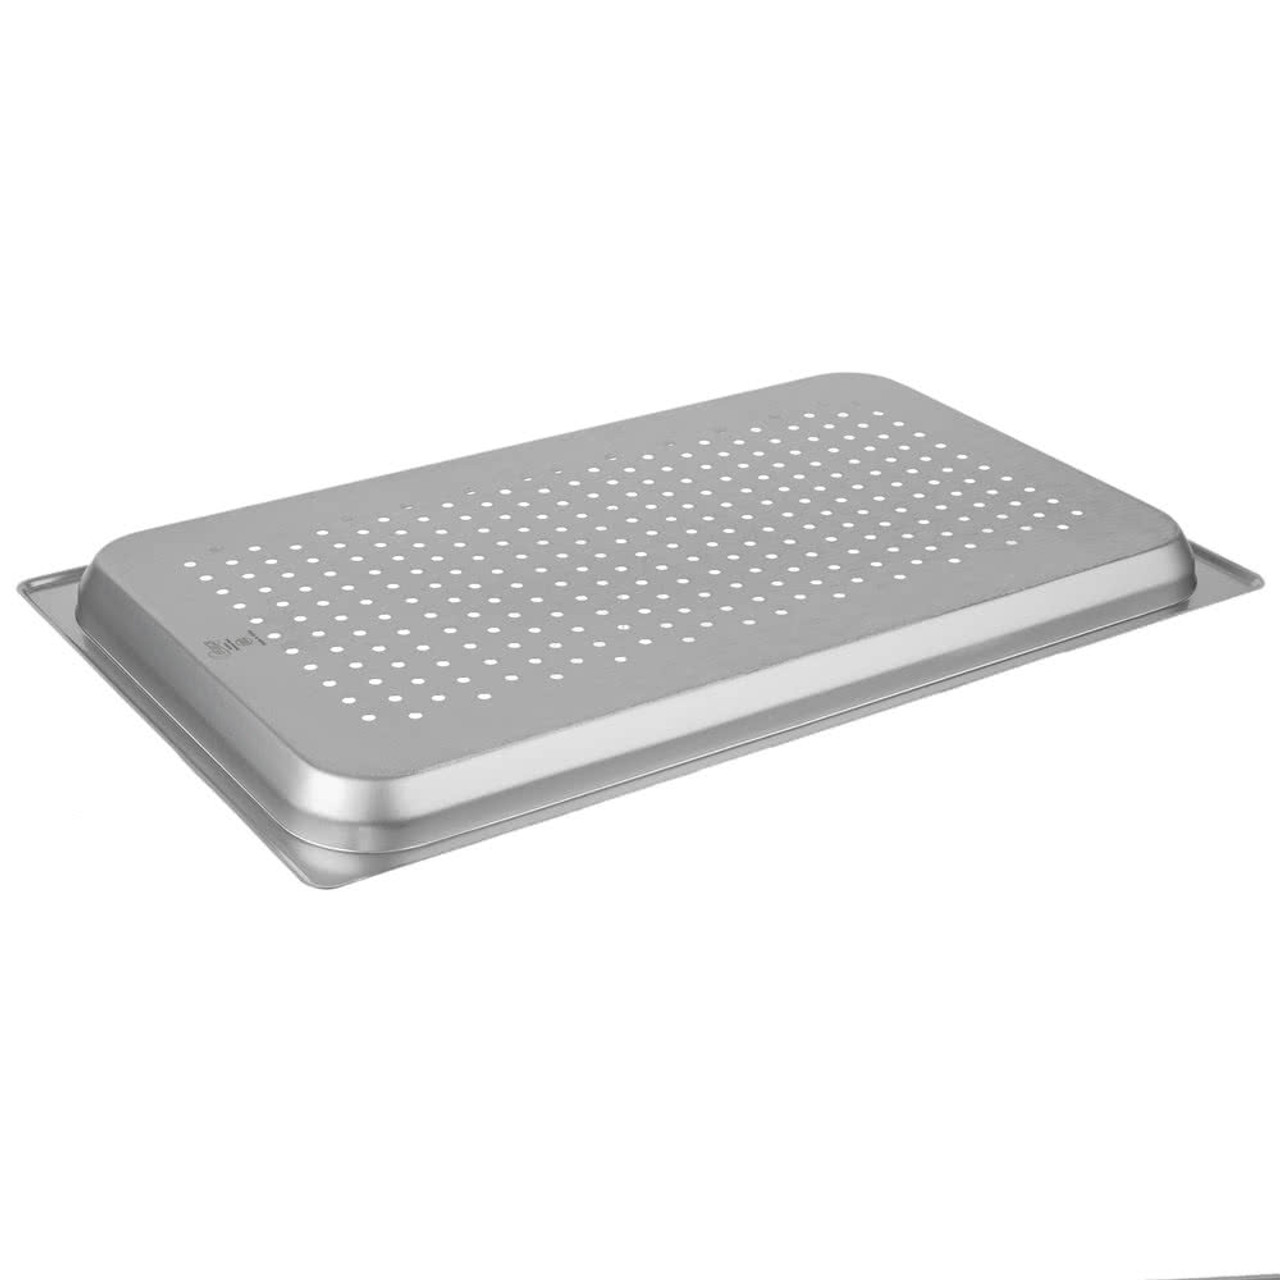 Standard Weight Anti-Jam Perforated Stainless Steel Steam Table / Hotel Pan - 1 1/4" Deep-Full Size 